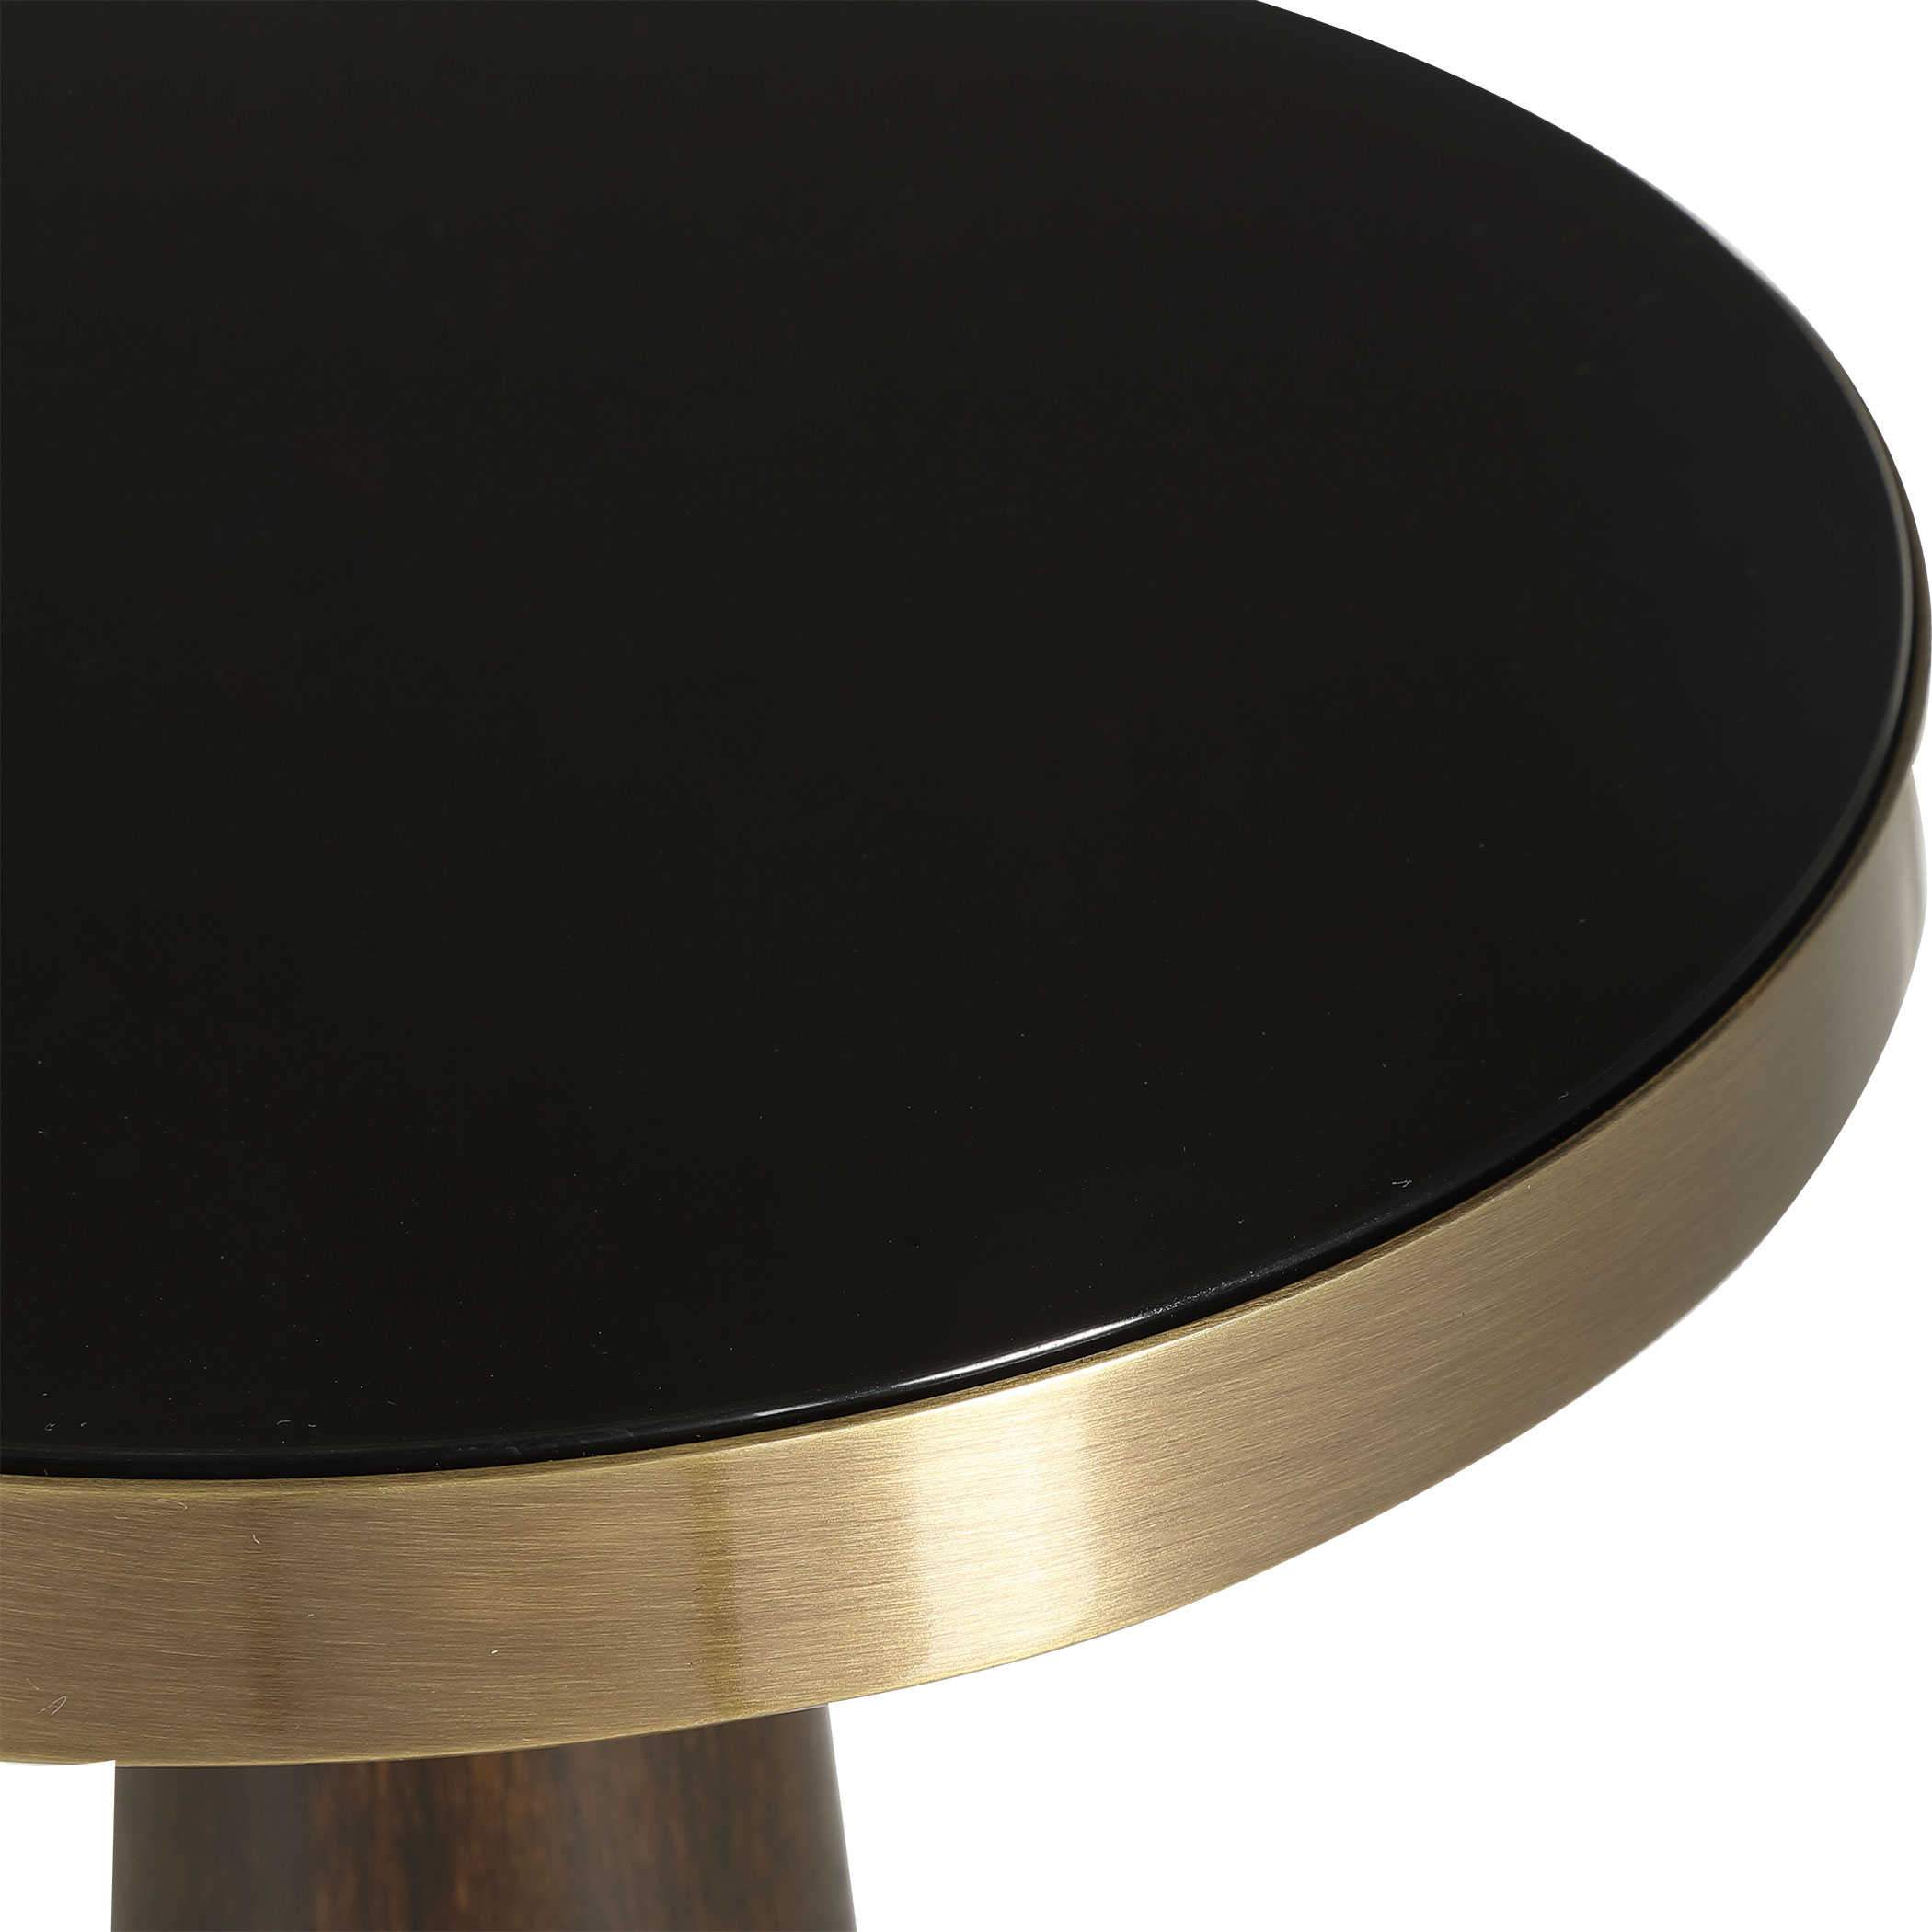 Fortier Accent Table Uttermost